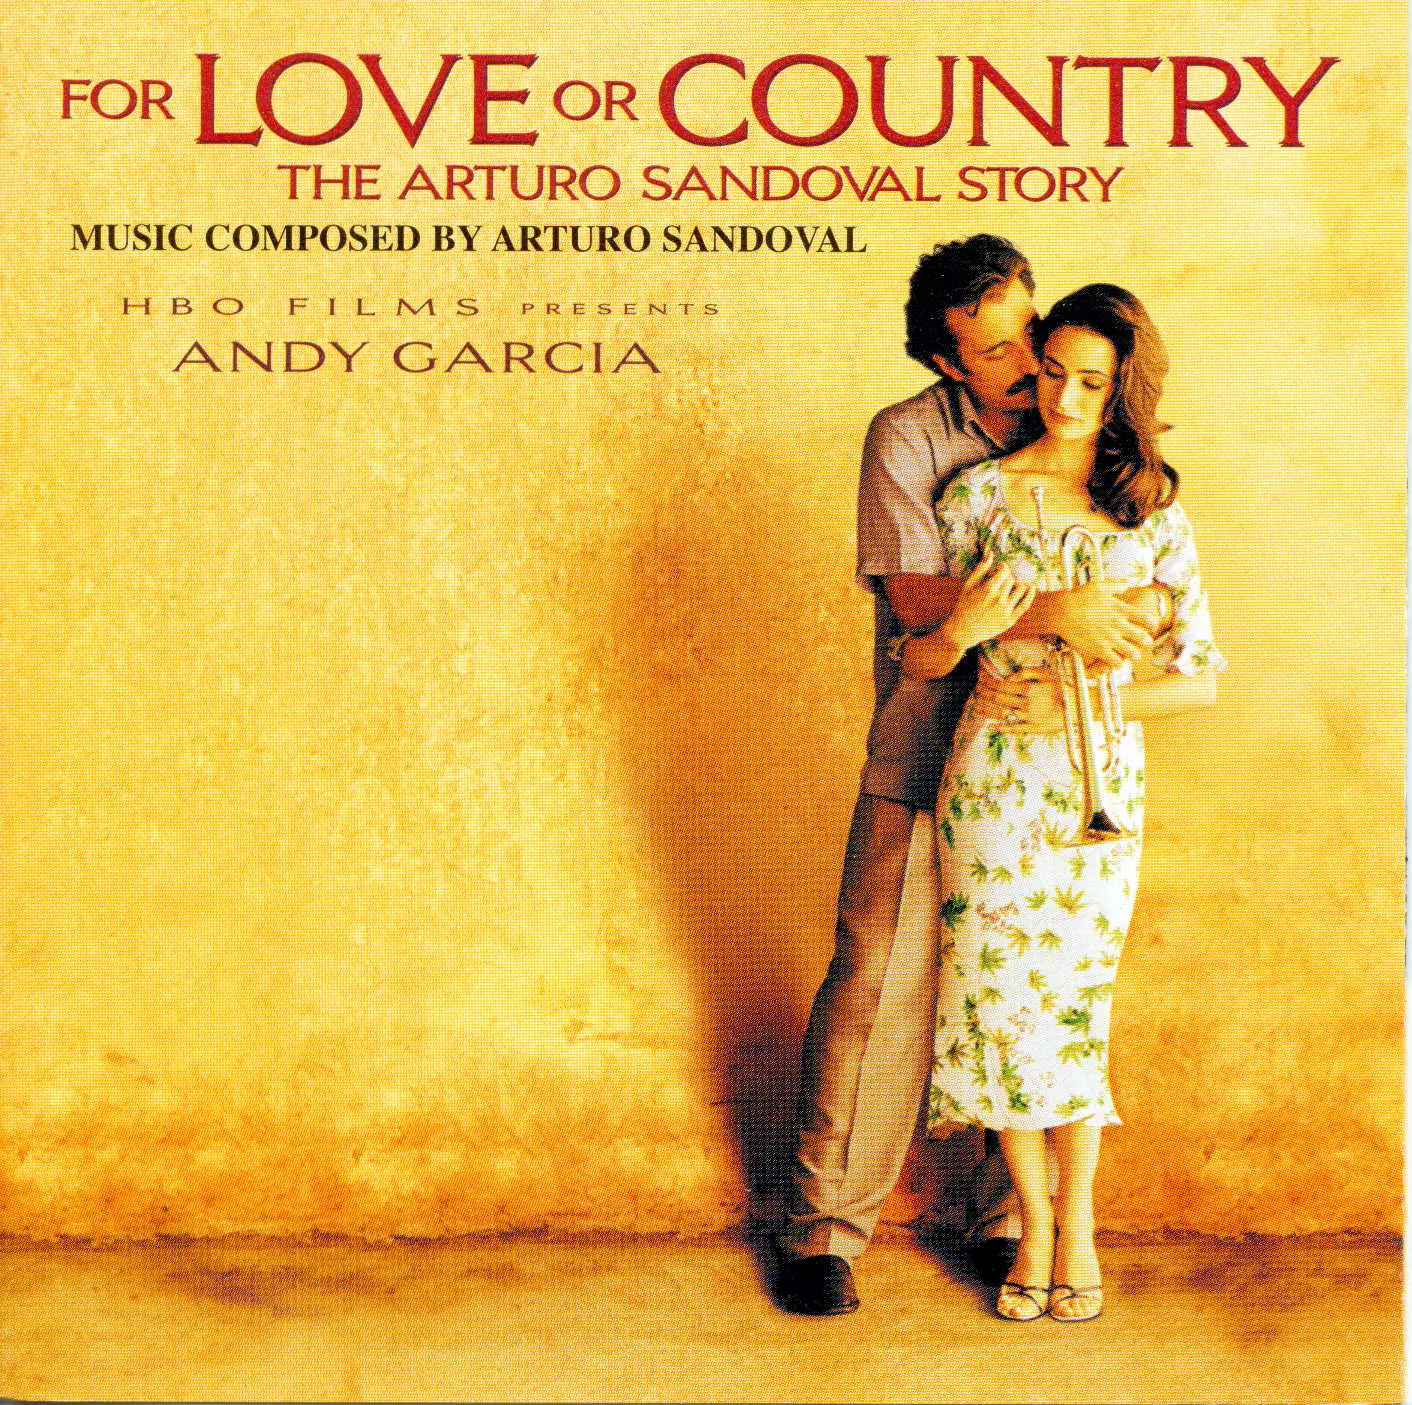 For Love or Country: the Arturo Sandoval story 2000